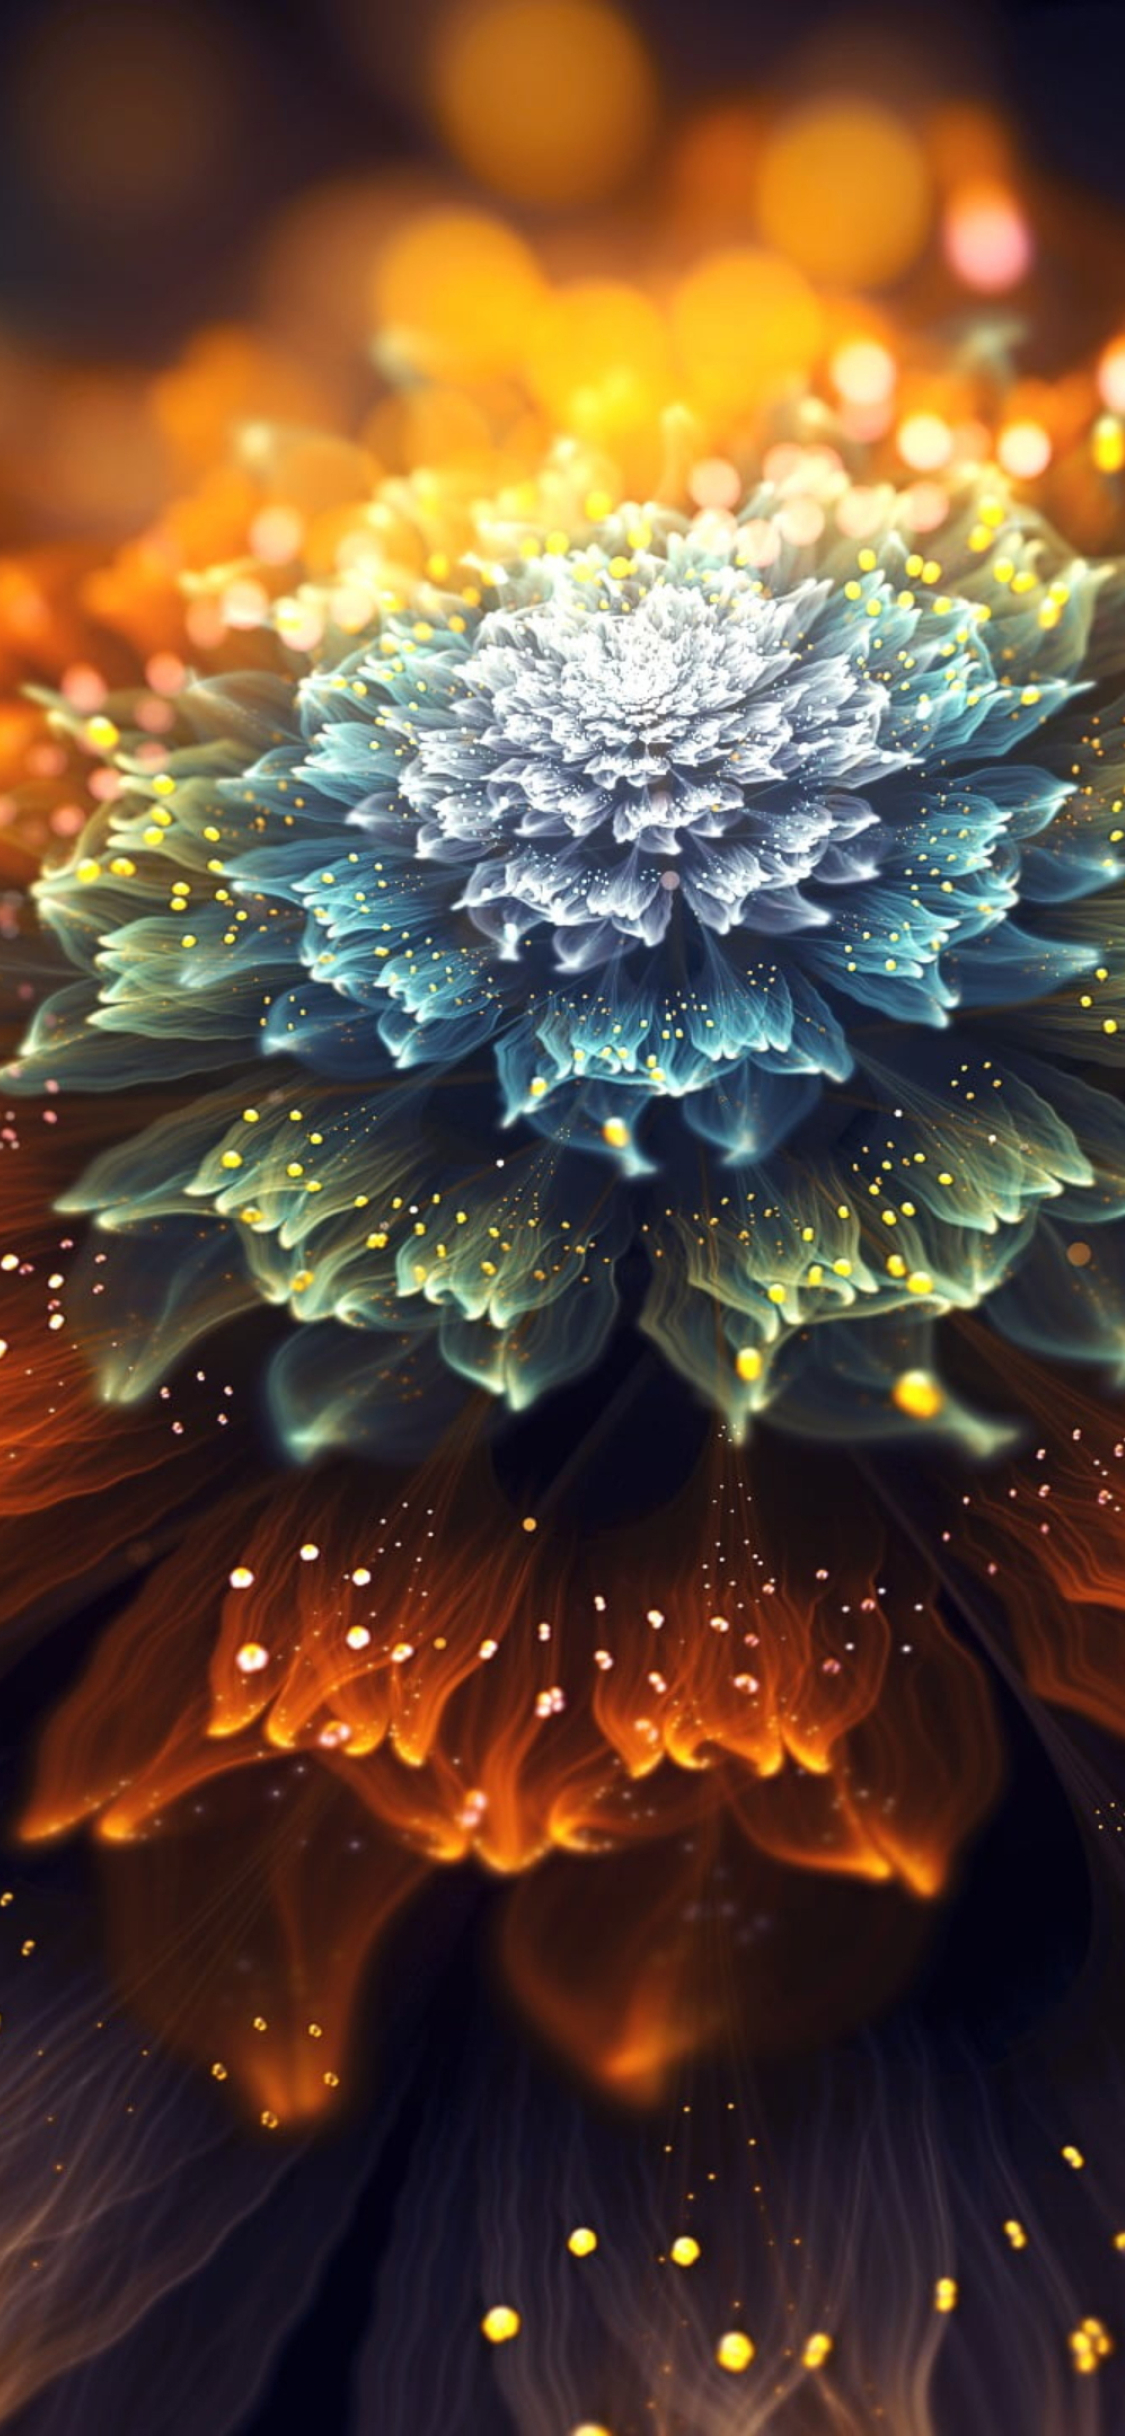 1125x2436 Orange And Blue Glowing Fractal Flowers Iphone Xsiphone 10